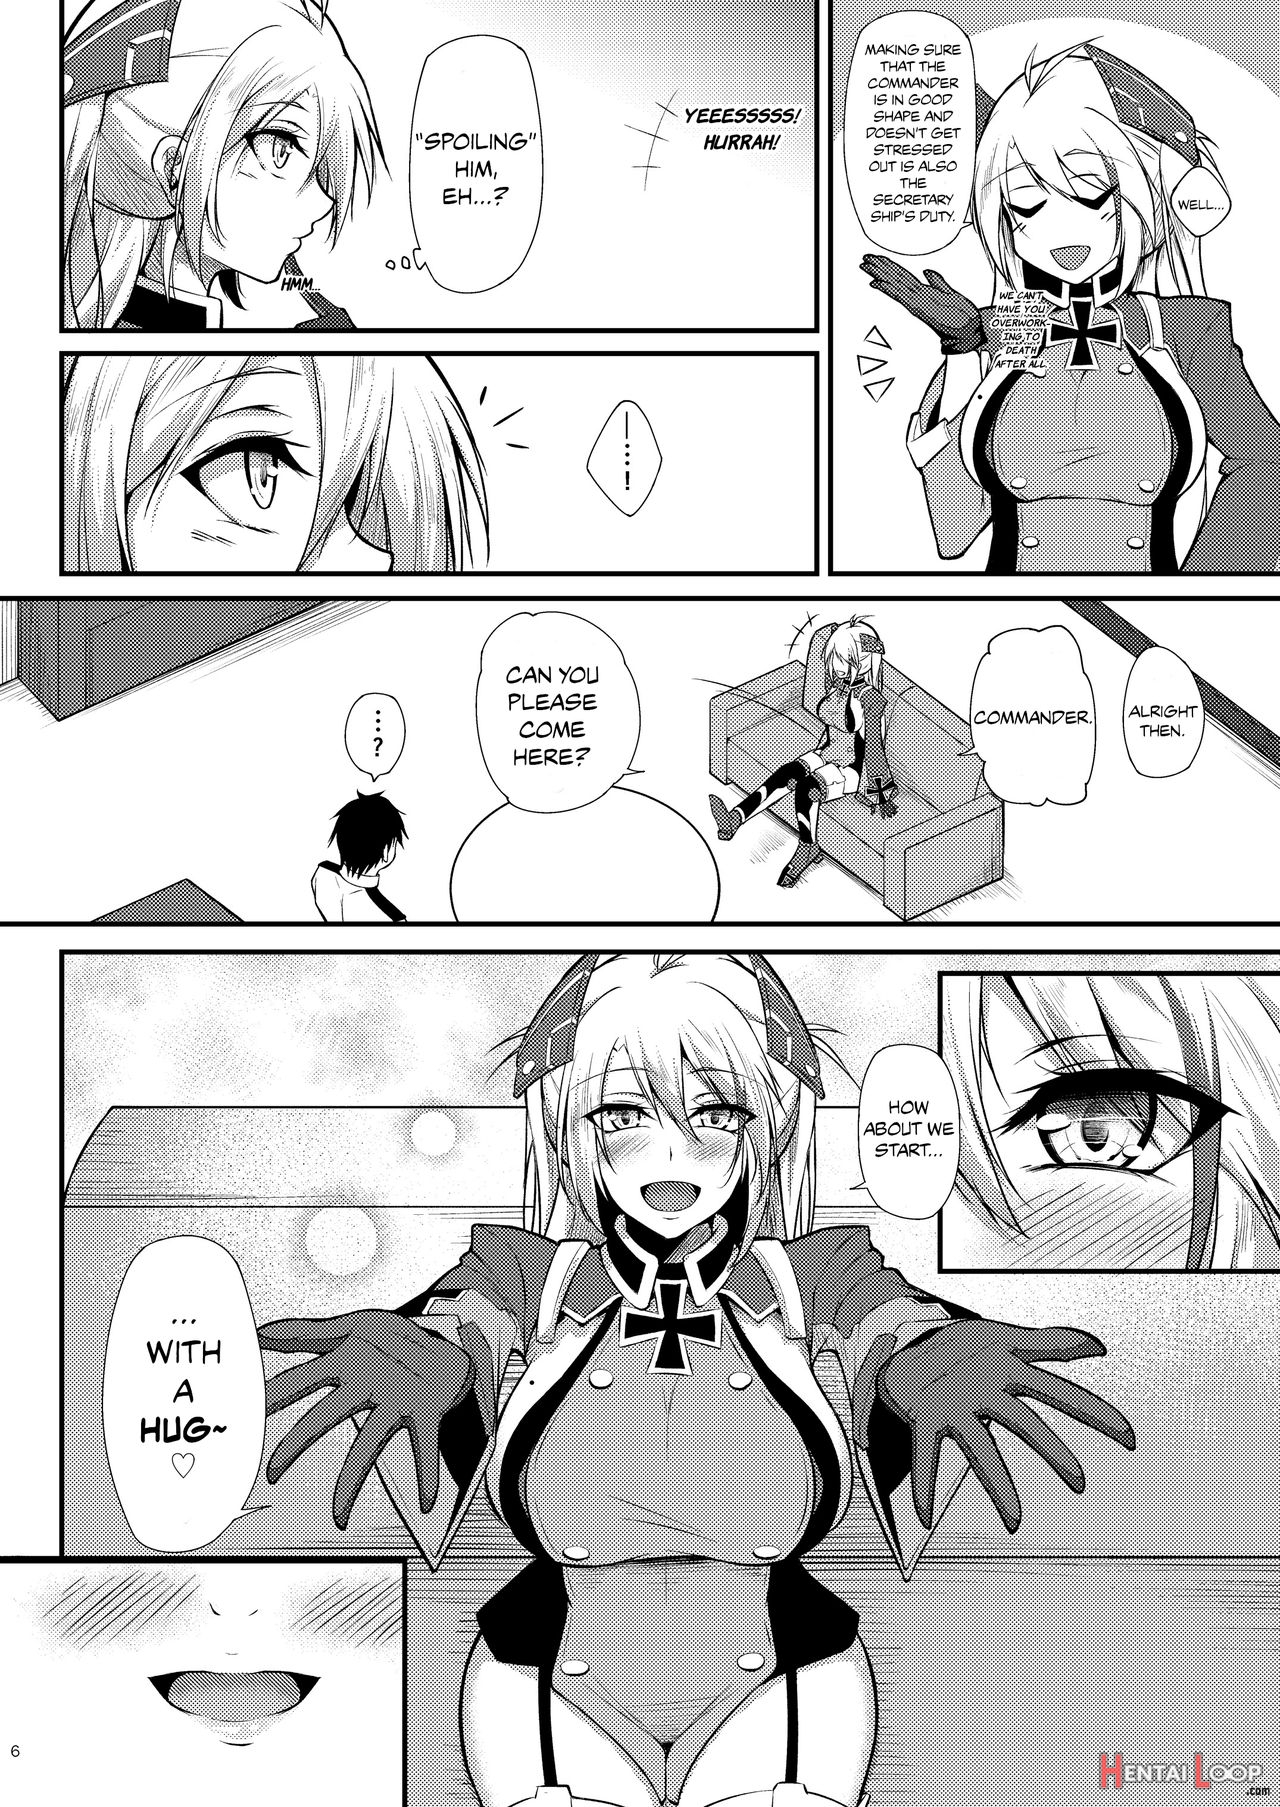 I Want To Be Spoiled By Prinz Eugen!! page 6